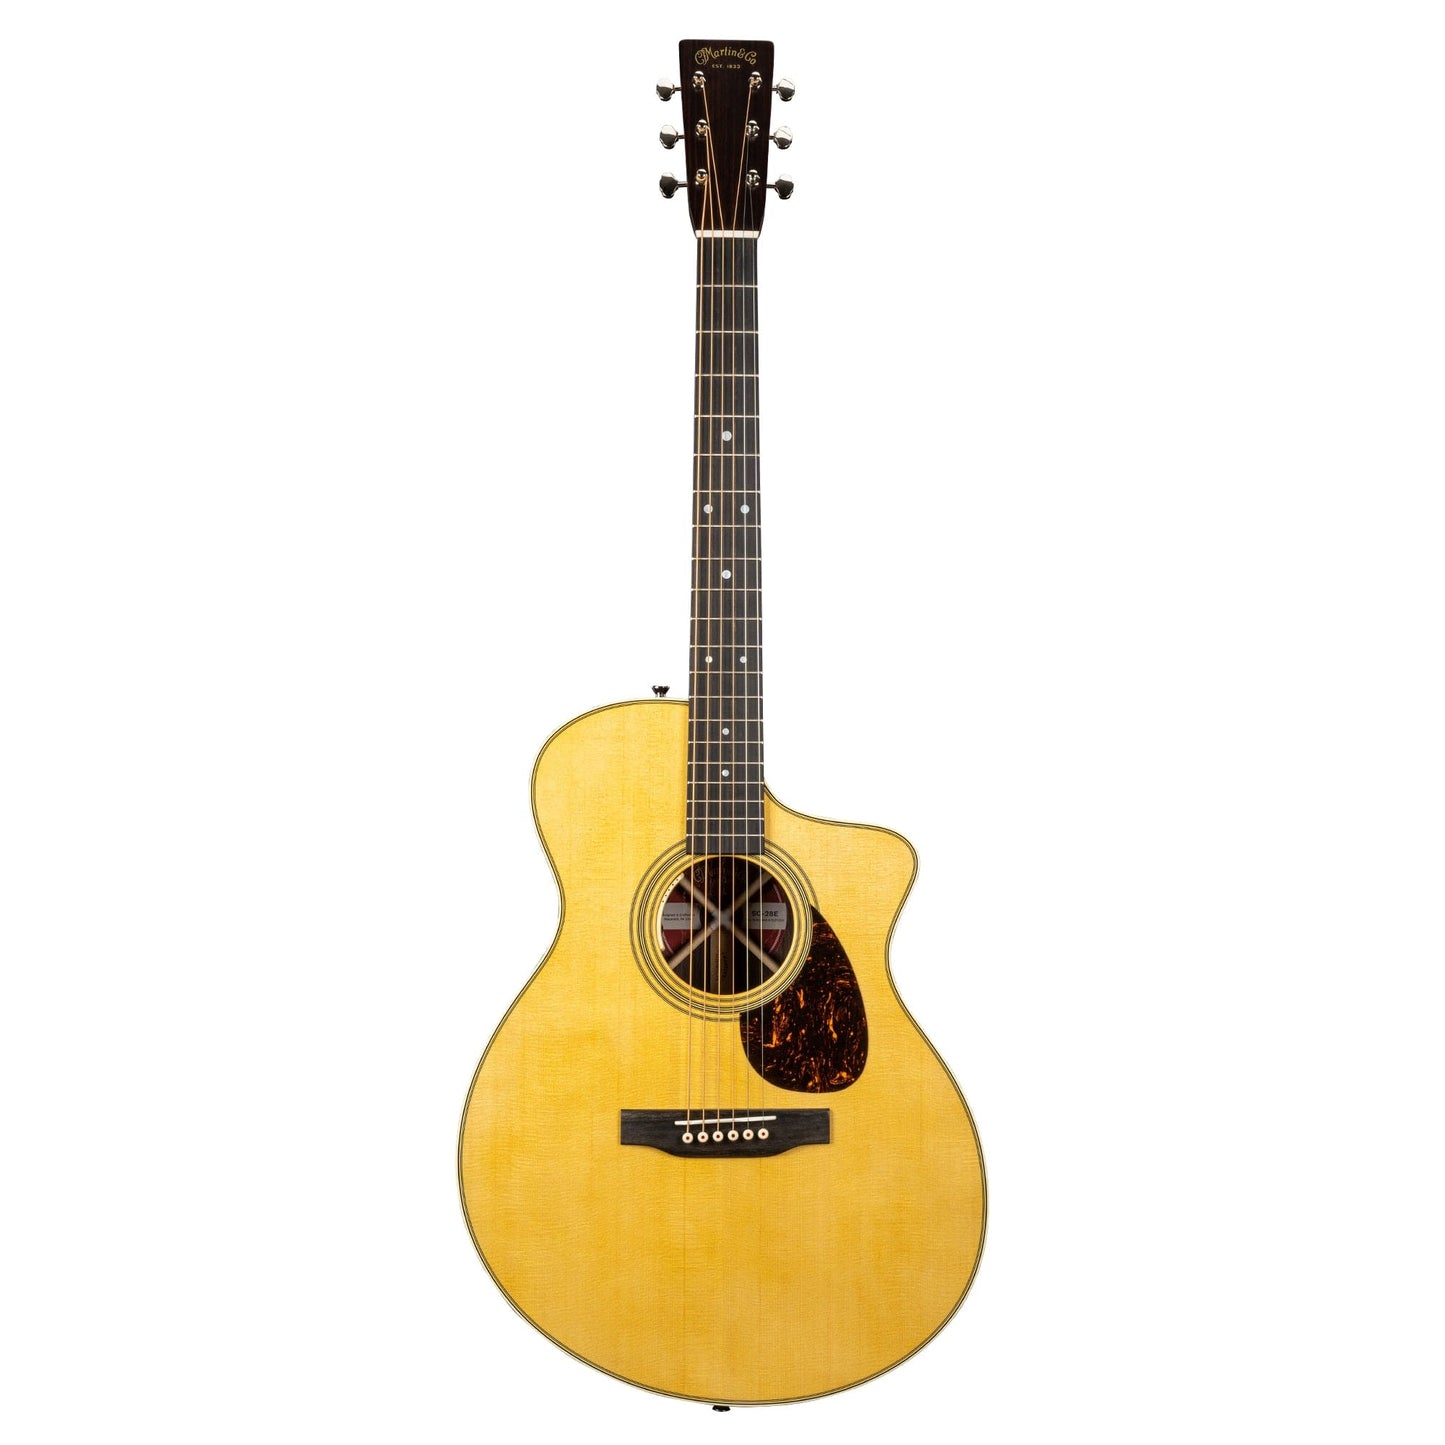 Martin Standard Series SC-28E Spruce/East Indian Rosewood Natural Acoustic Guitars / Concert